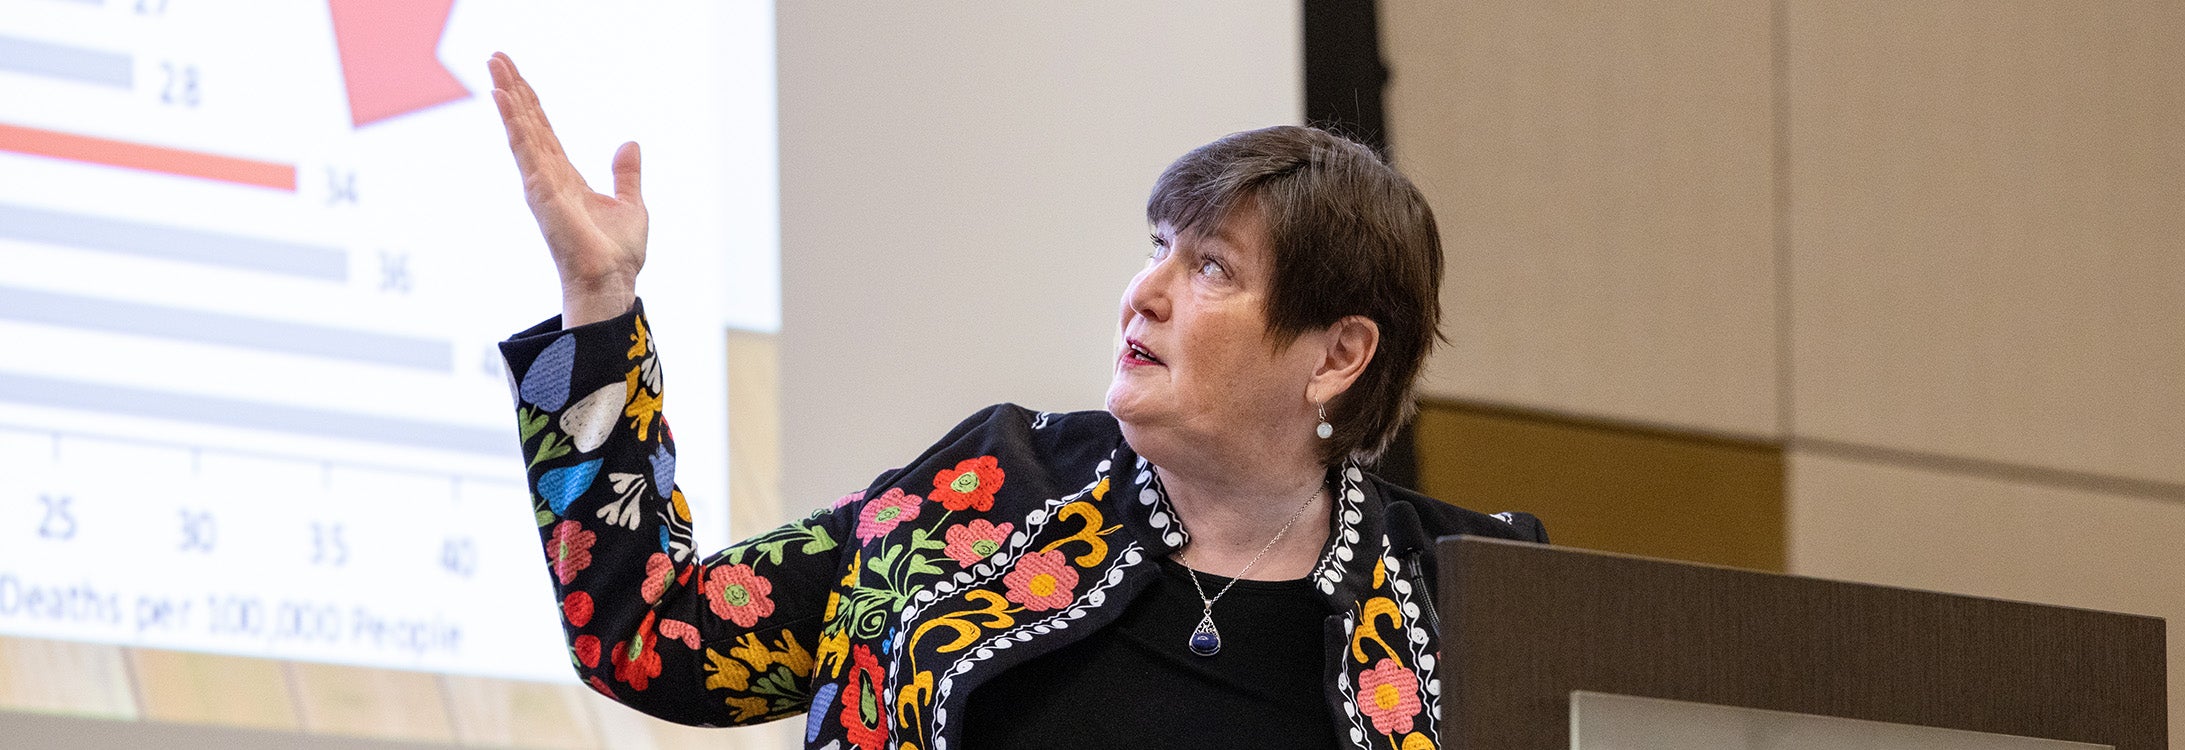 Dr. Wendy Nilsen, director for the National Science Foundation Smart and Connected Health program, gives the keynote address during CET Research Day. (Photo by Rhett Butler)